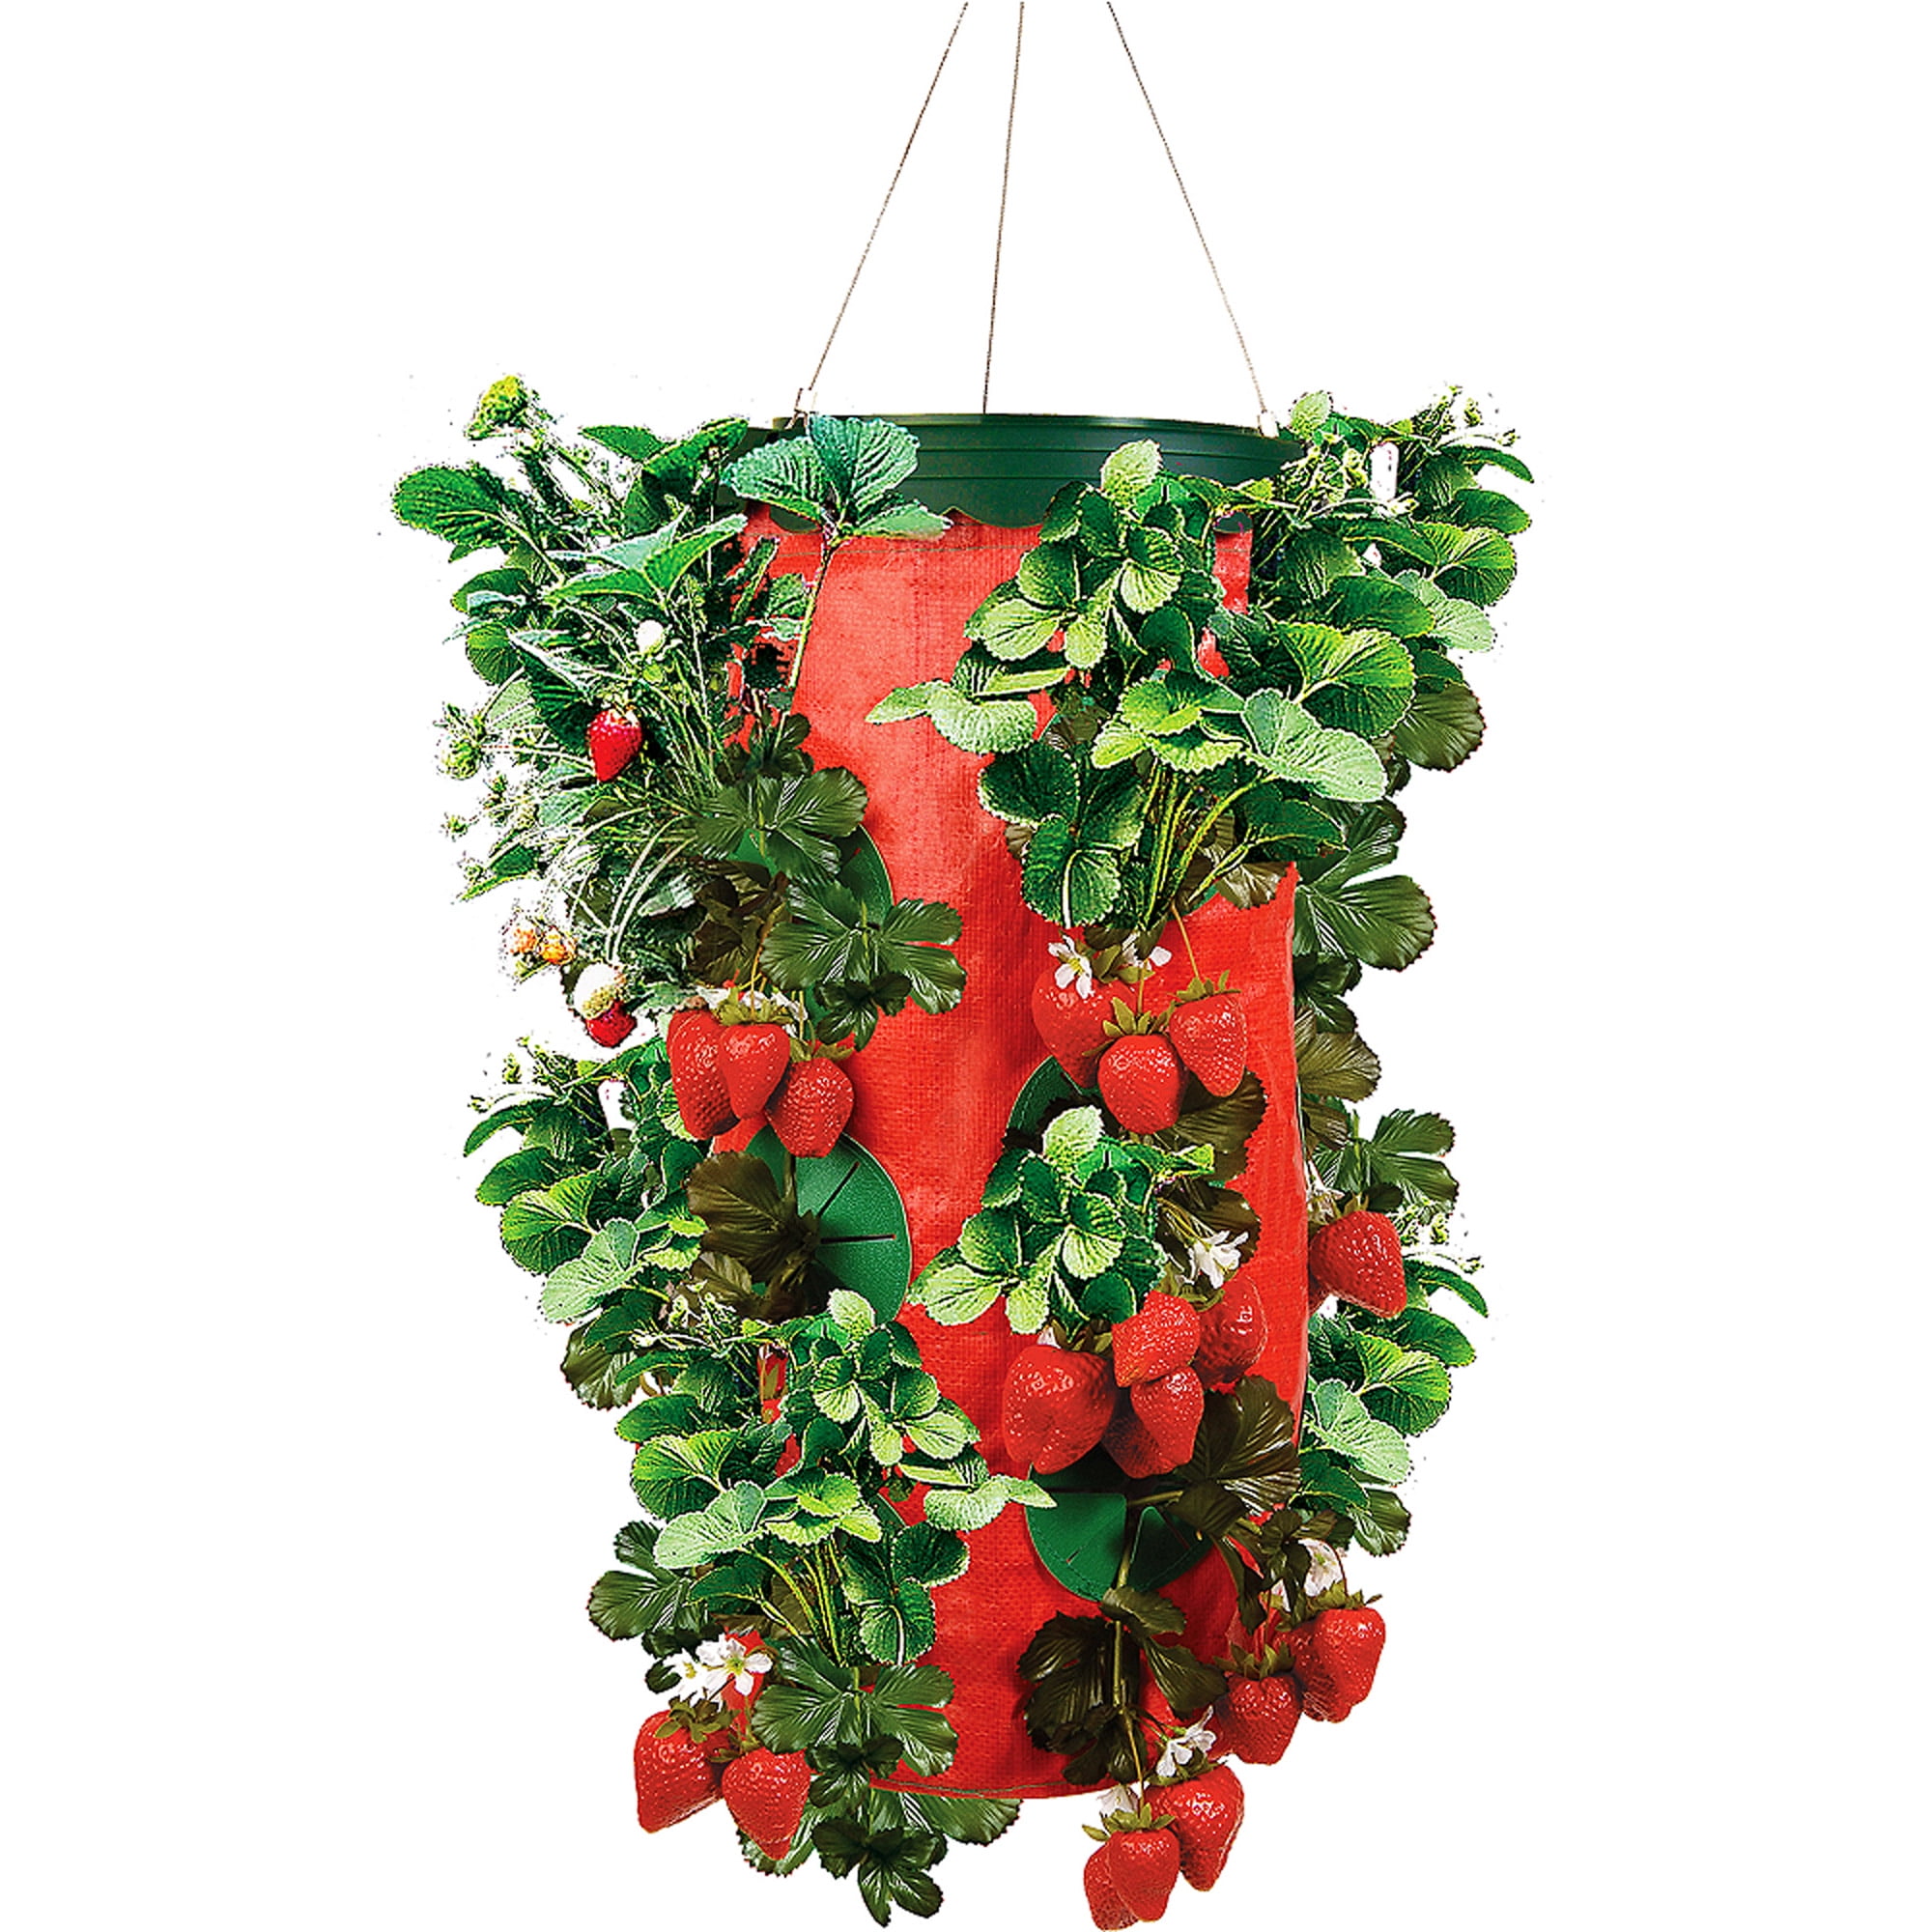 Topsy Turvy STRAWBERRY HANGING PLANTER Upside Down Swivel Top Pack of 3 